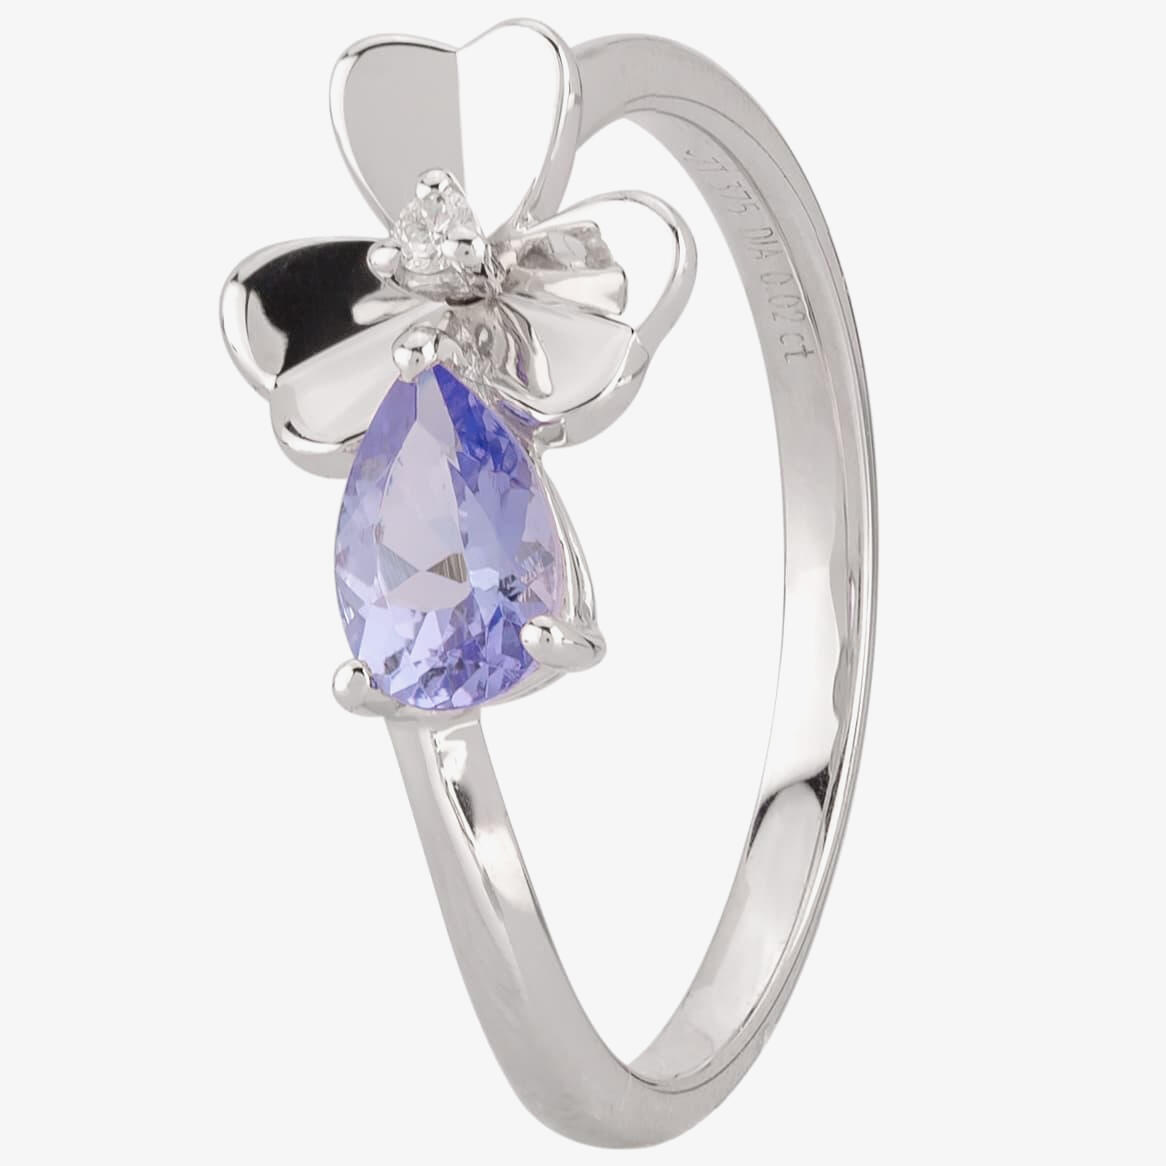 9ct White Gold Diamond Pear Shaped Tanzanite Flower Ring CY308R-T2A 9KW M